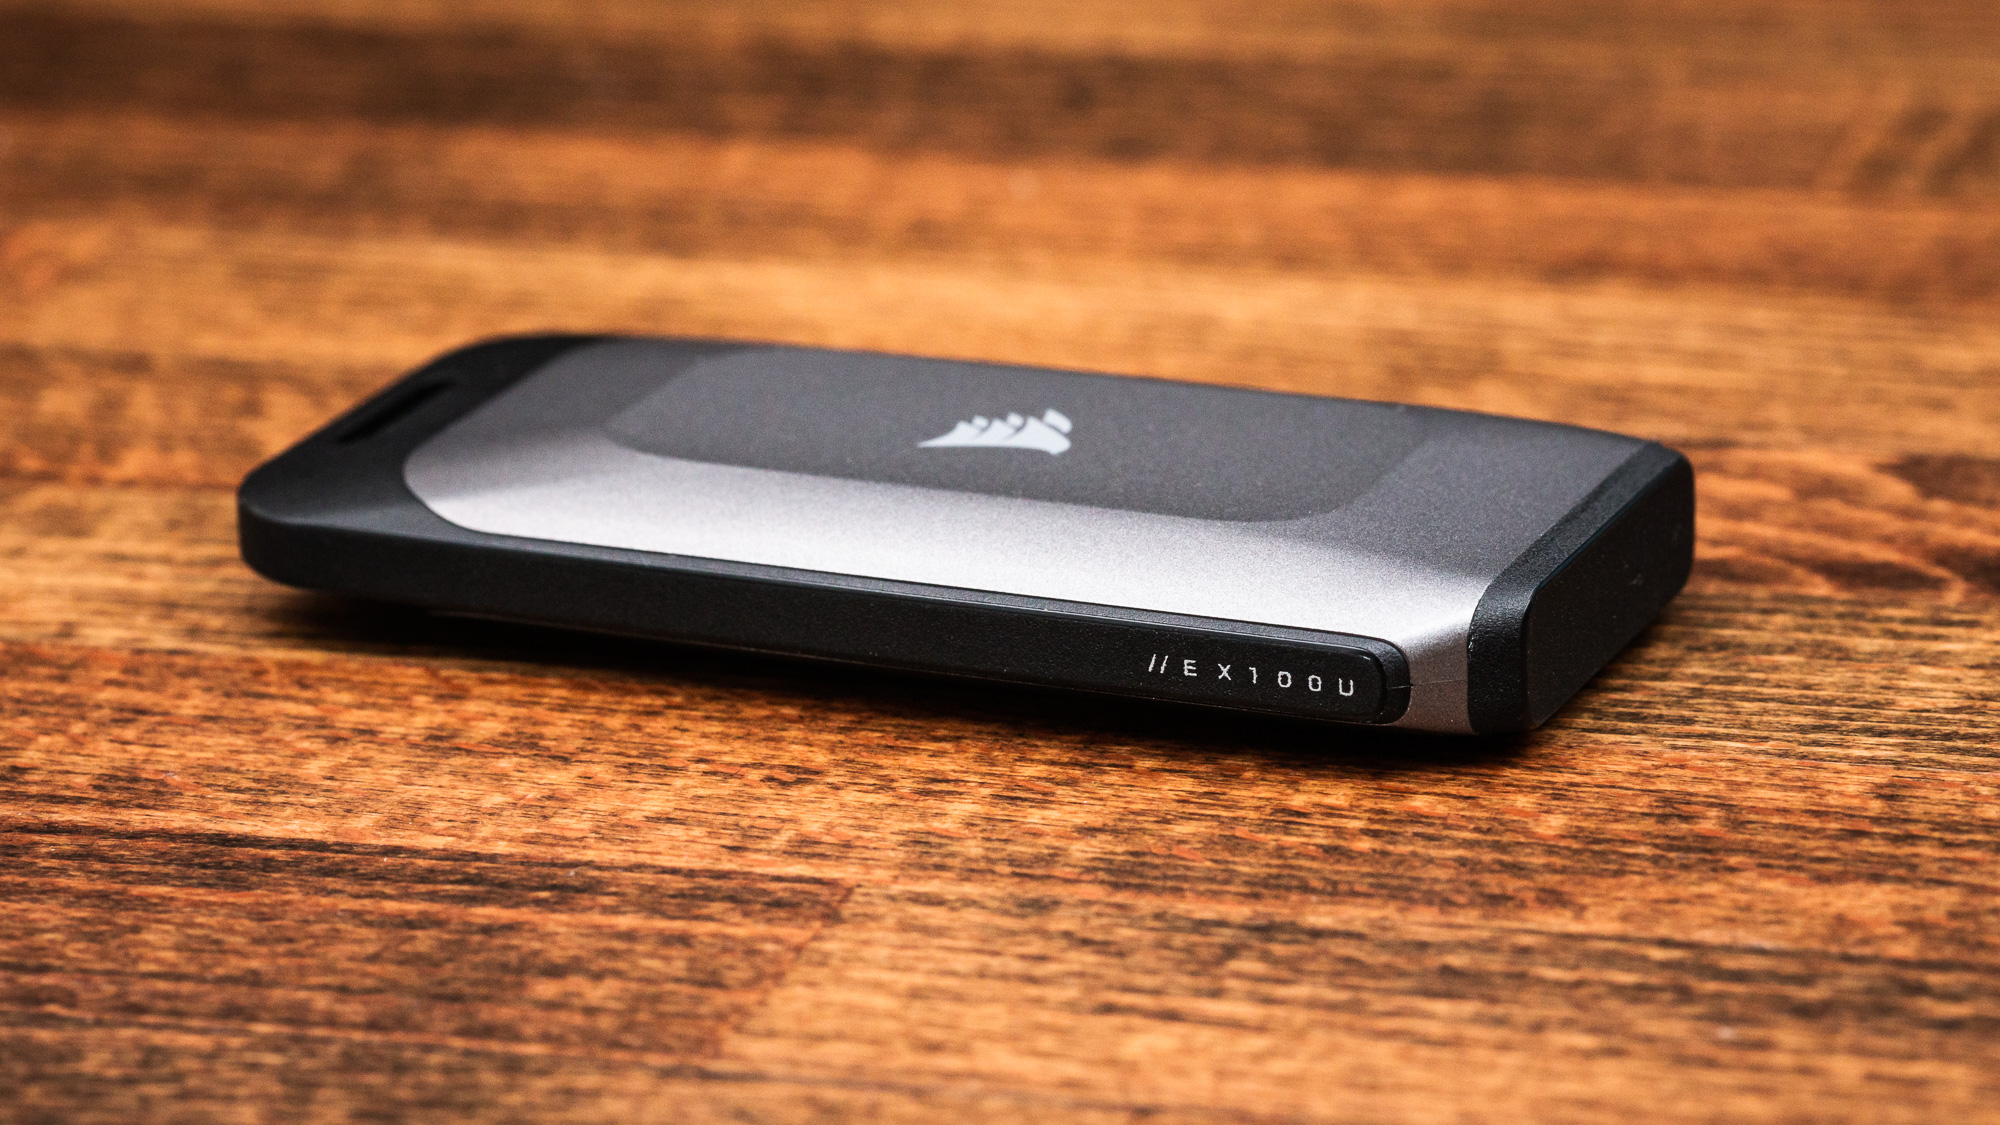 Corsair EX100U Portable SSD Review: The Good, The Bad, and the Average